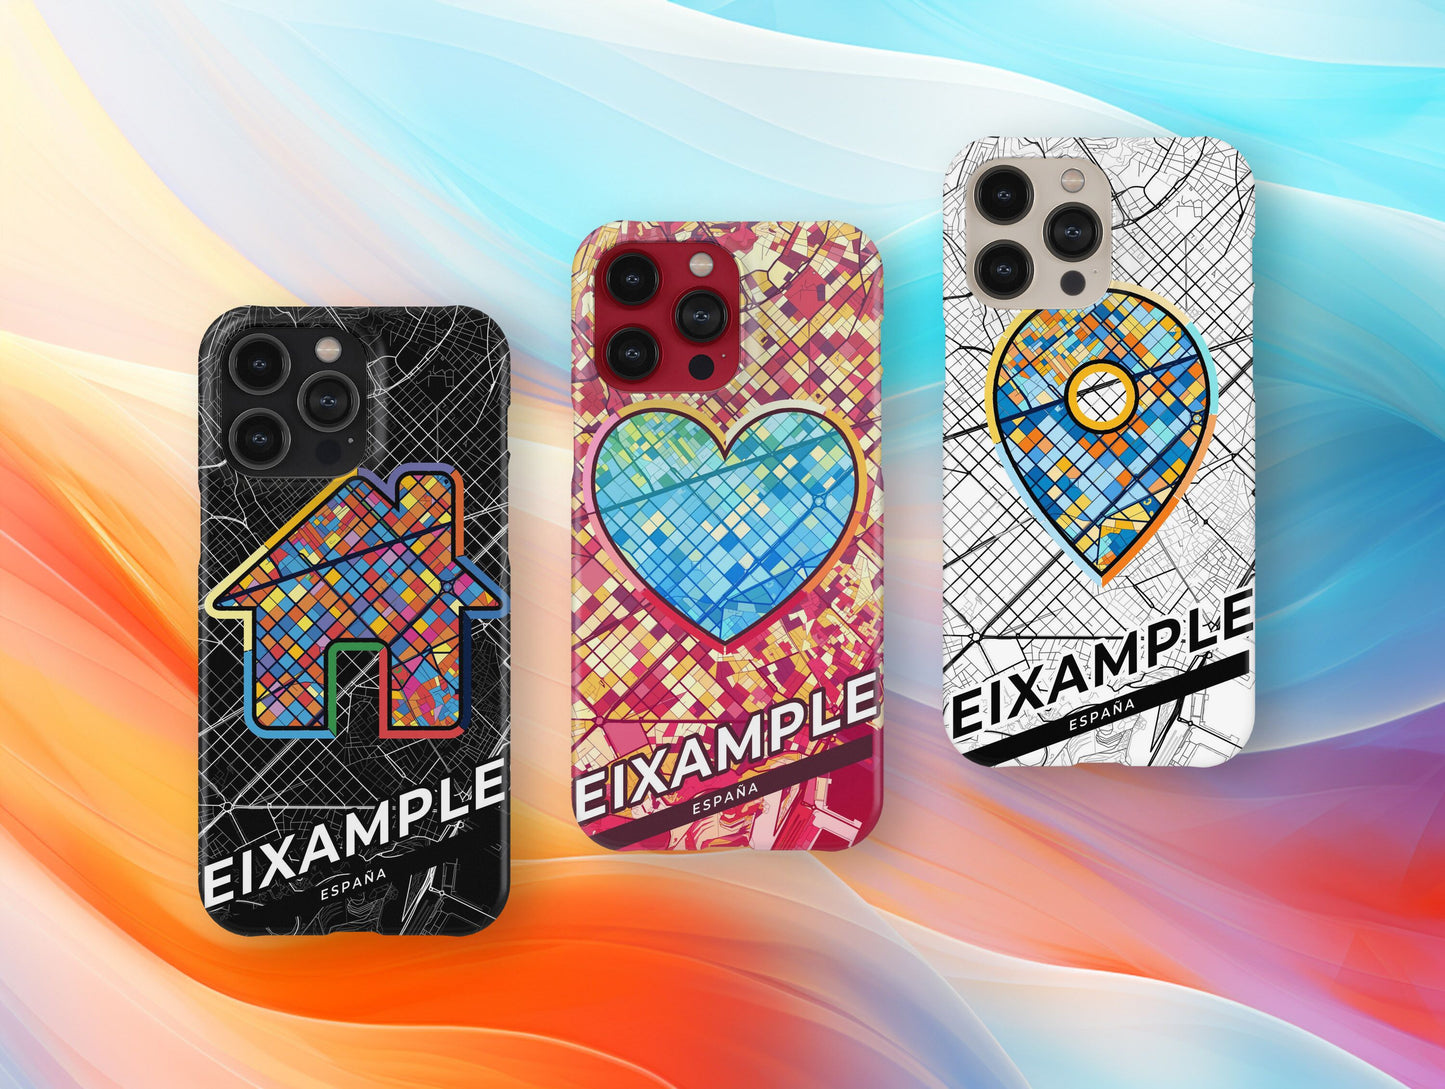 Eixample Spain slim phone case with colorful icon. Birthday, wedding or housewarming gift. Couple match cases.